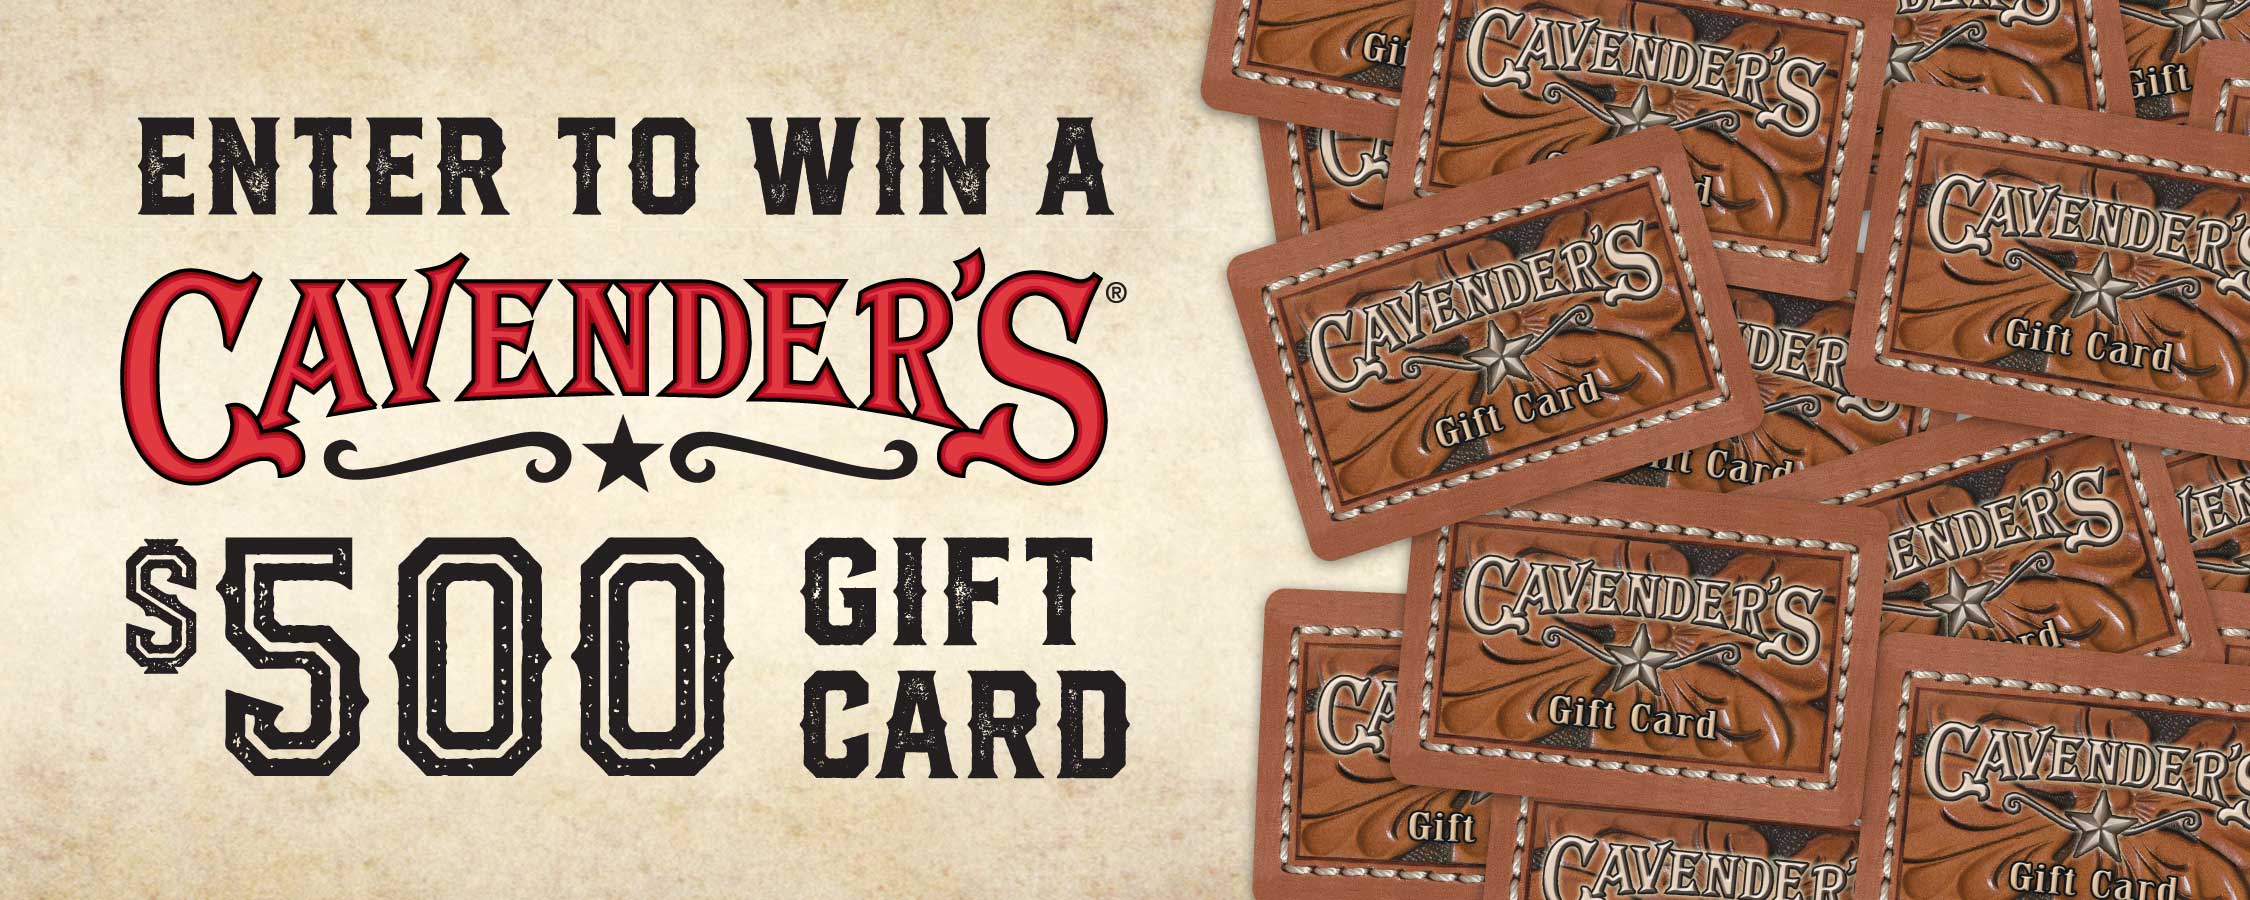 Enter the San Antonio Rodeo Giveaway February 10-27, 2022.